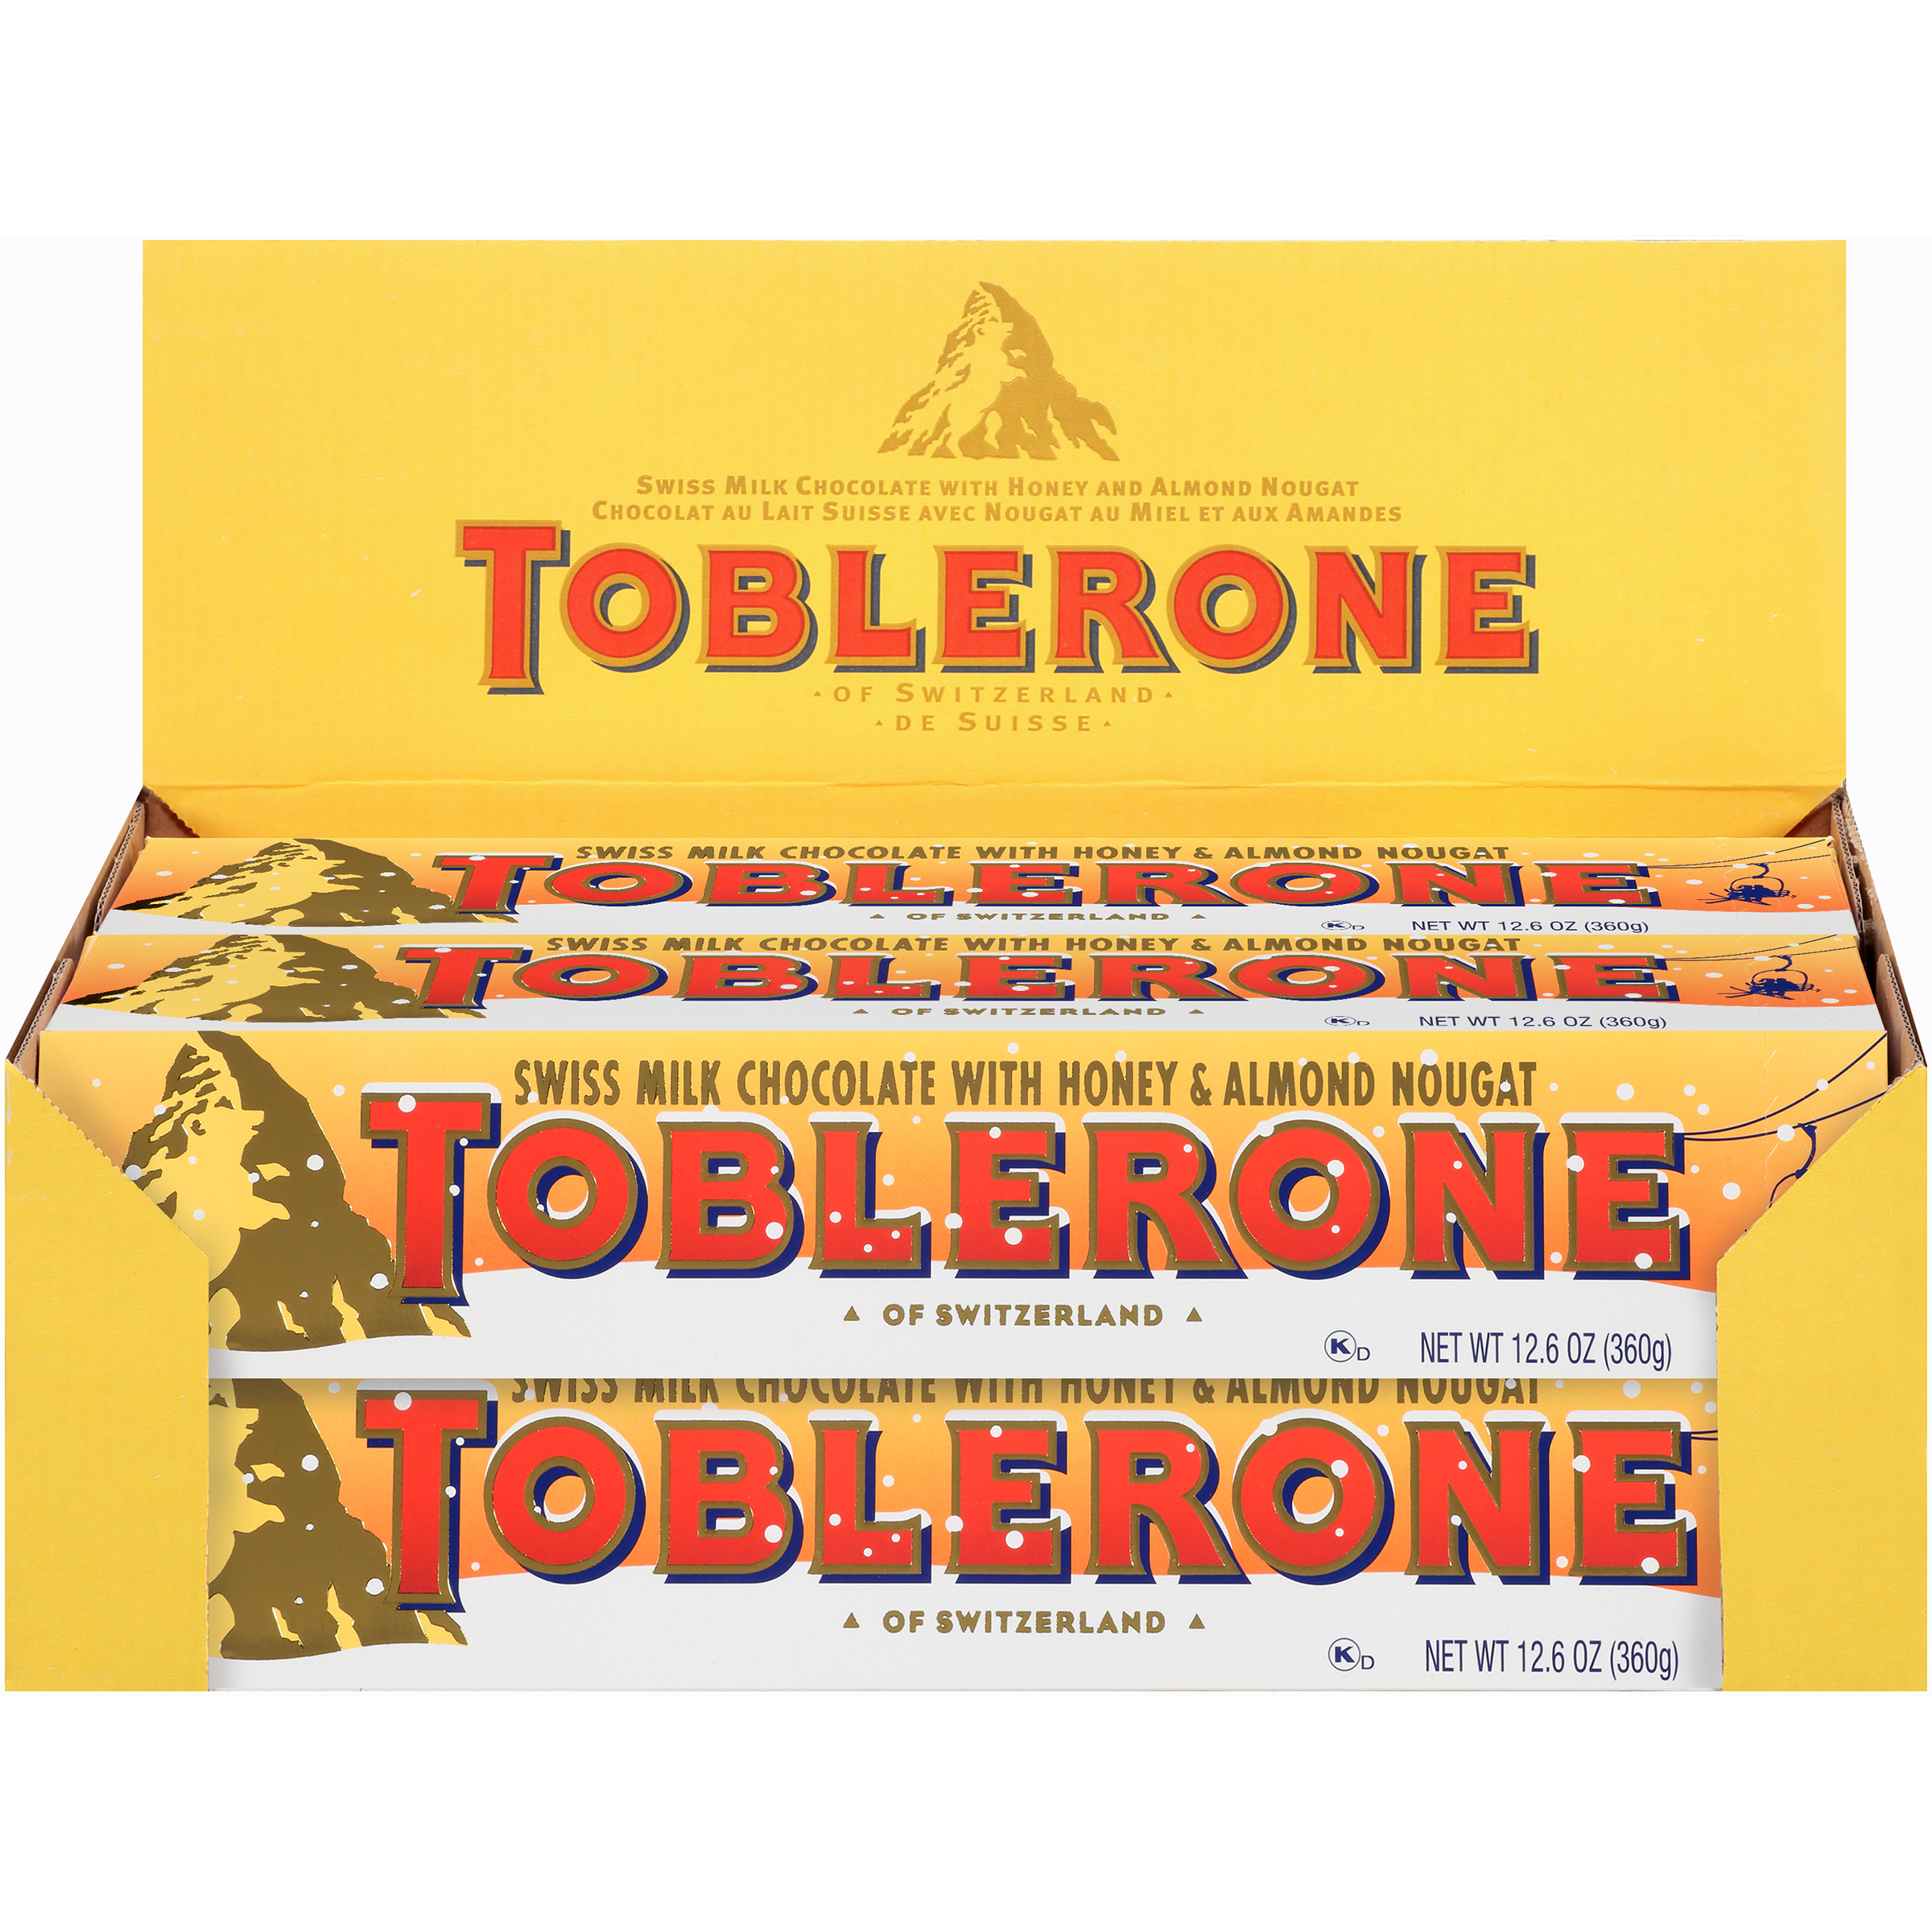 Toblerone Swiss Milk Chocolate with Honey & Almond Nougat, Holiday Chocolate Candy, 10 - 12.6 oz Bars